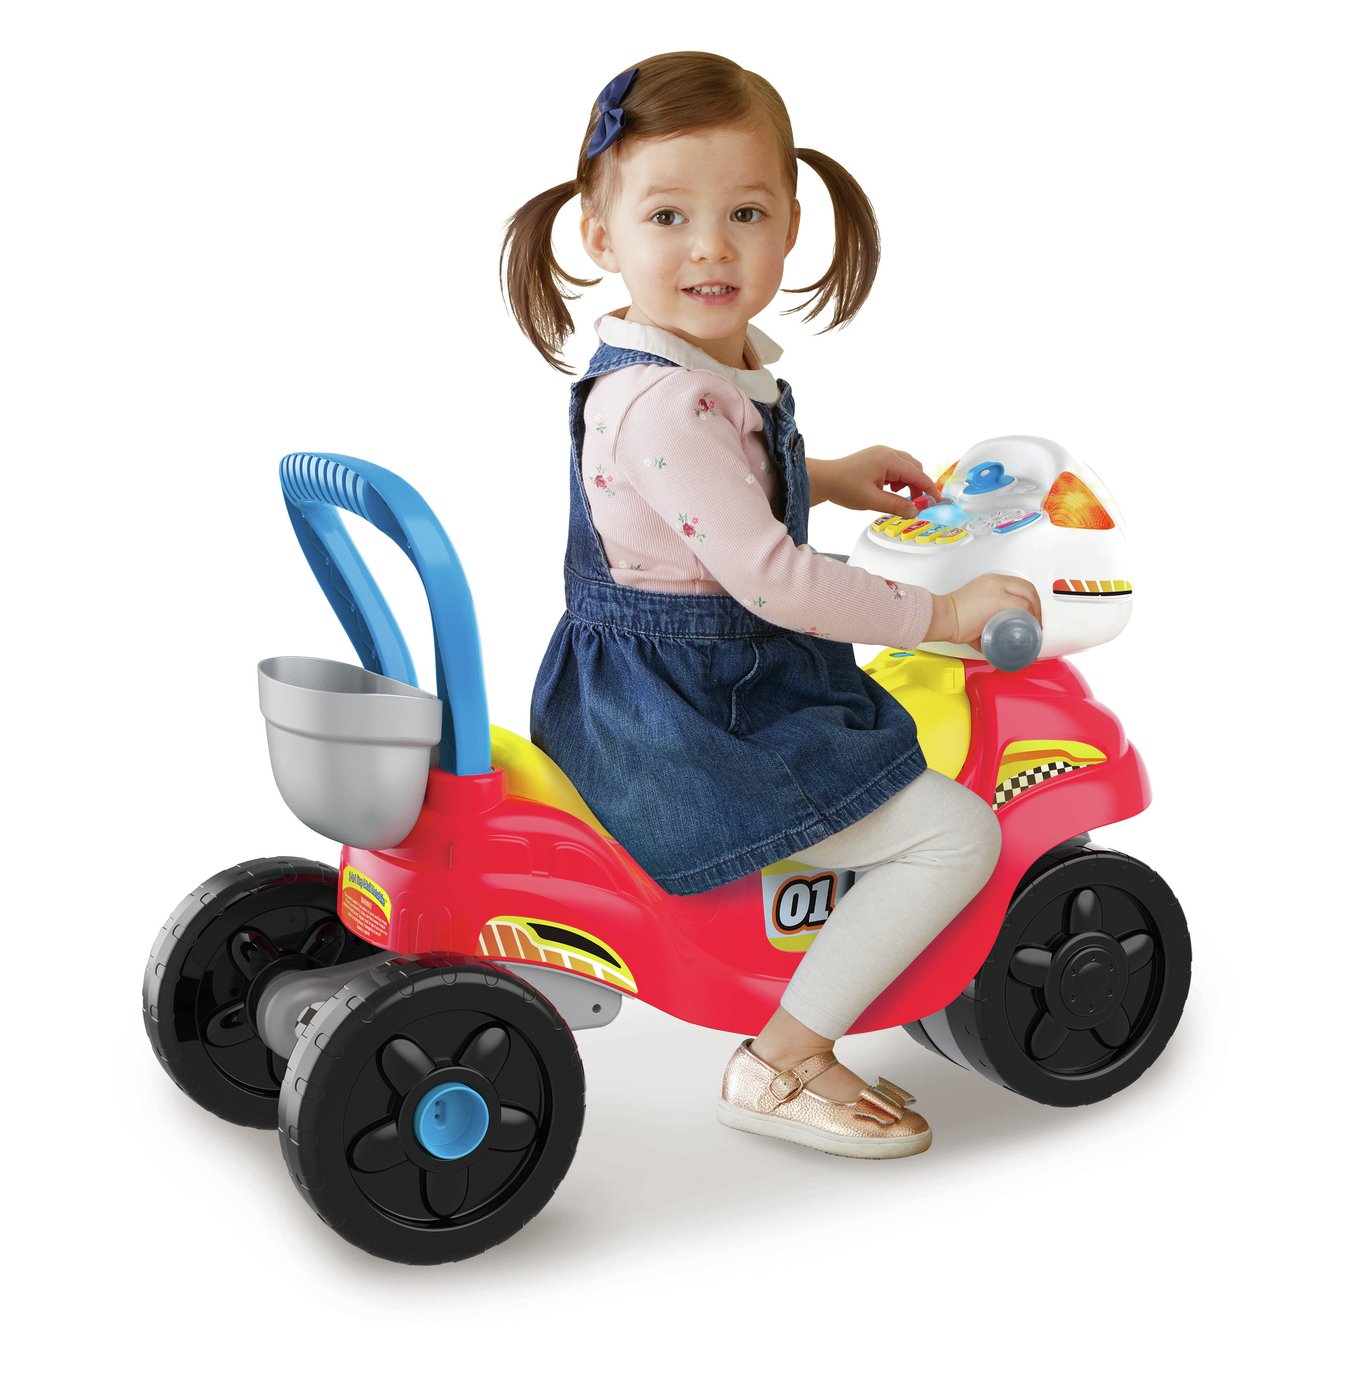 VTech 3-In-1 Ride With Me Motorbike review